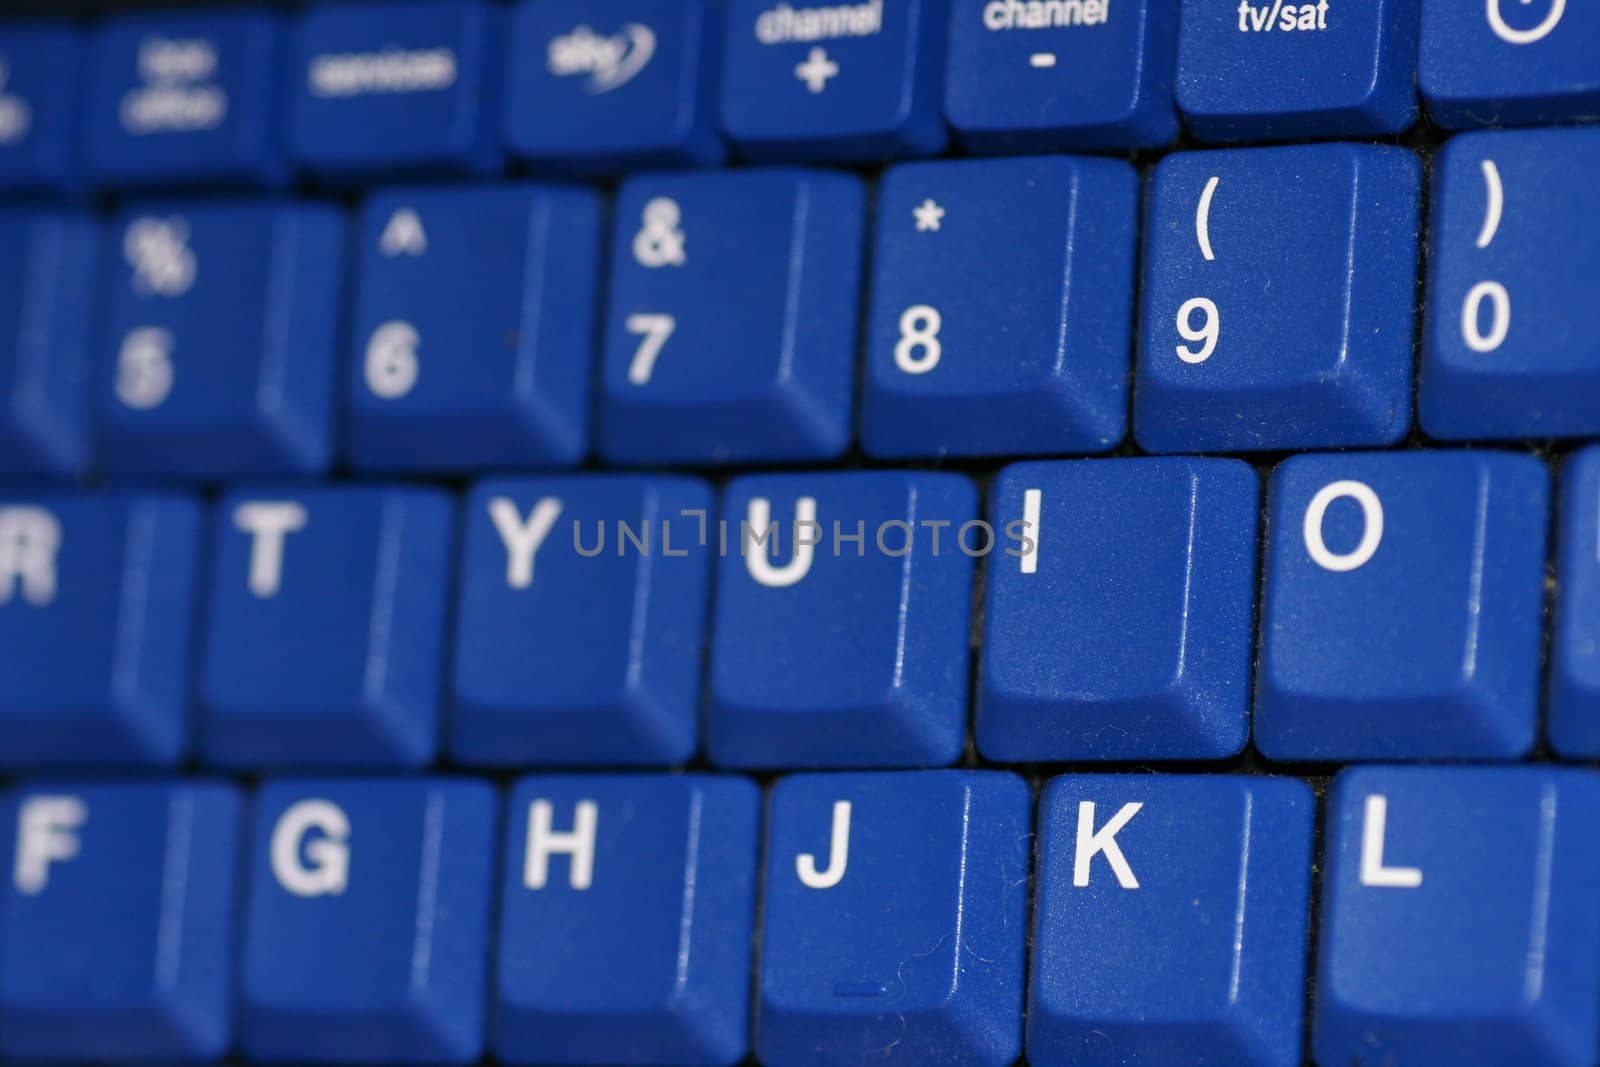 A keyboard looking from the right to the left.